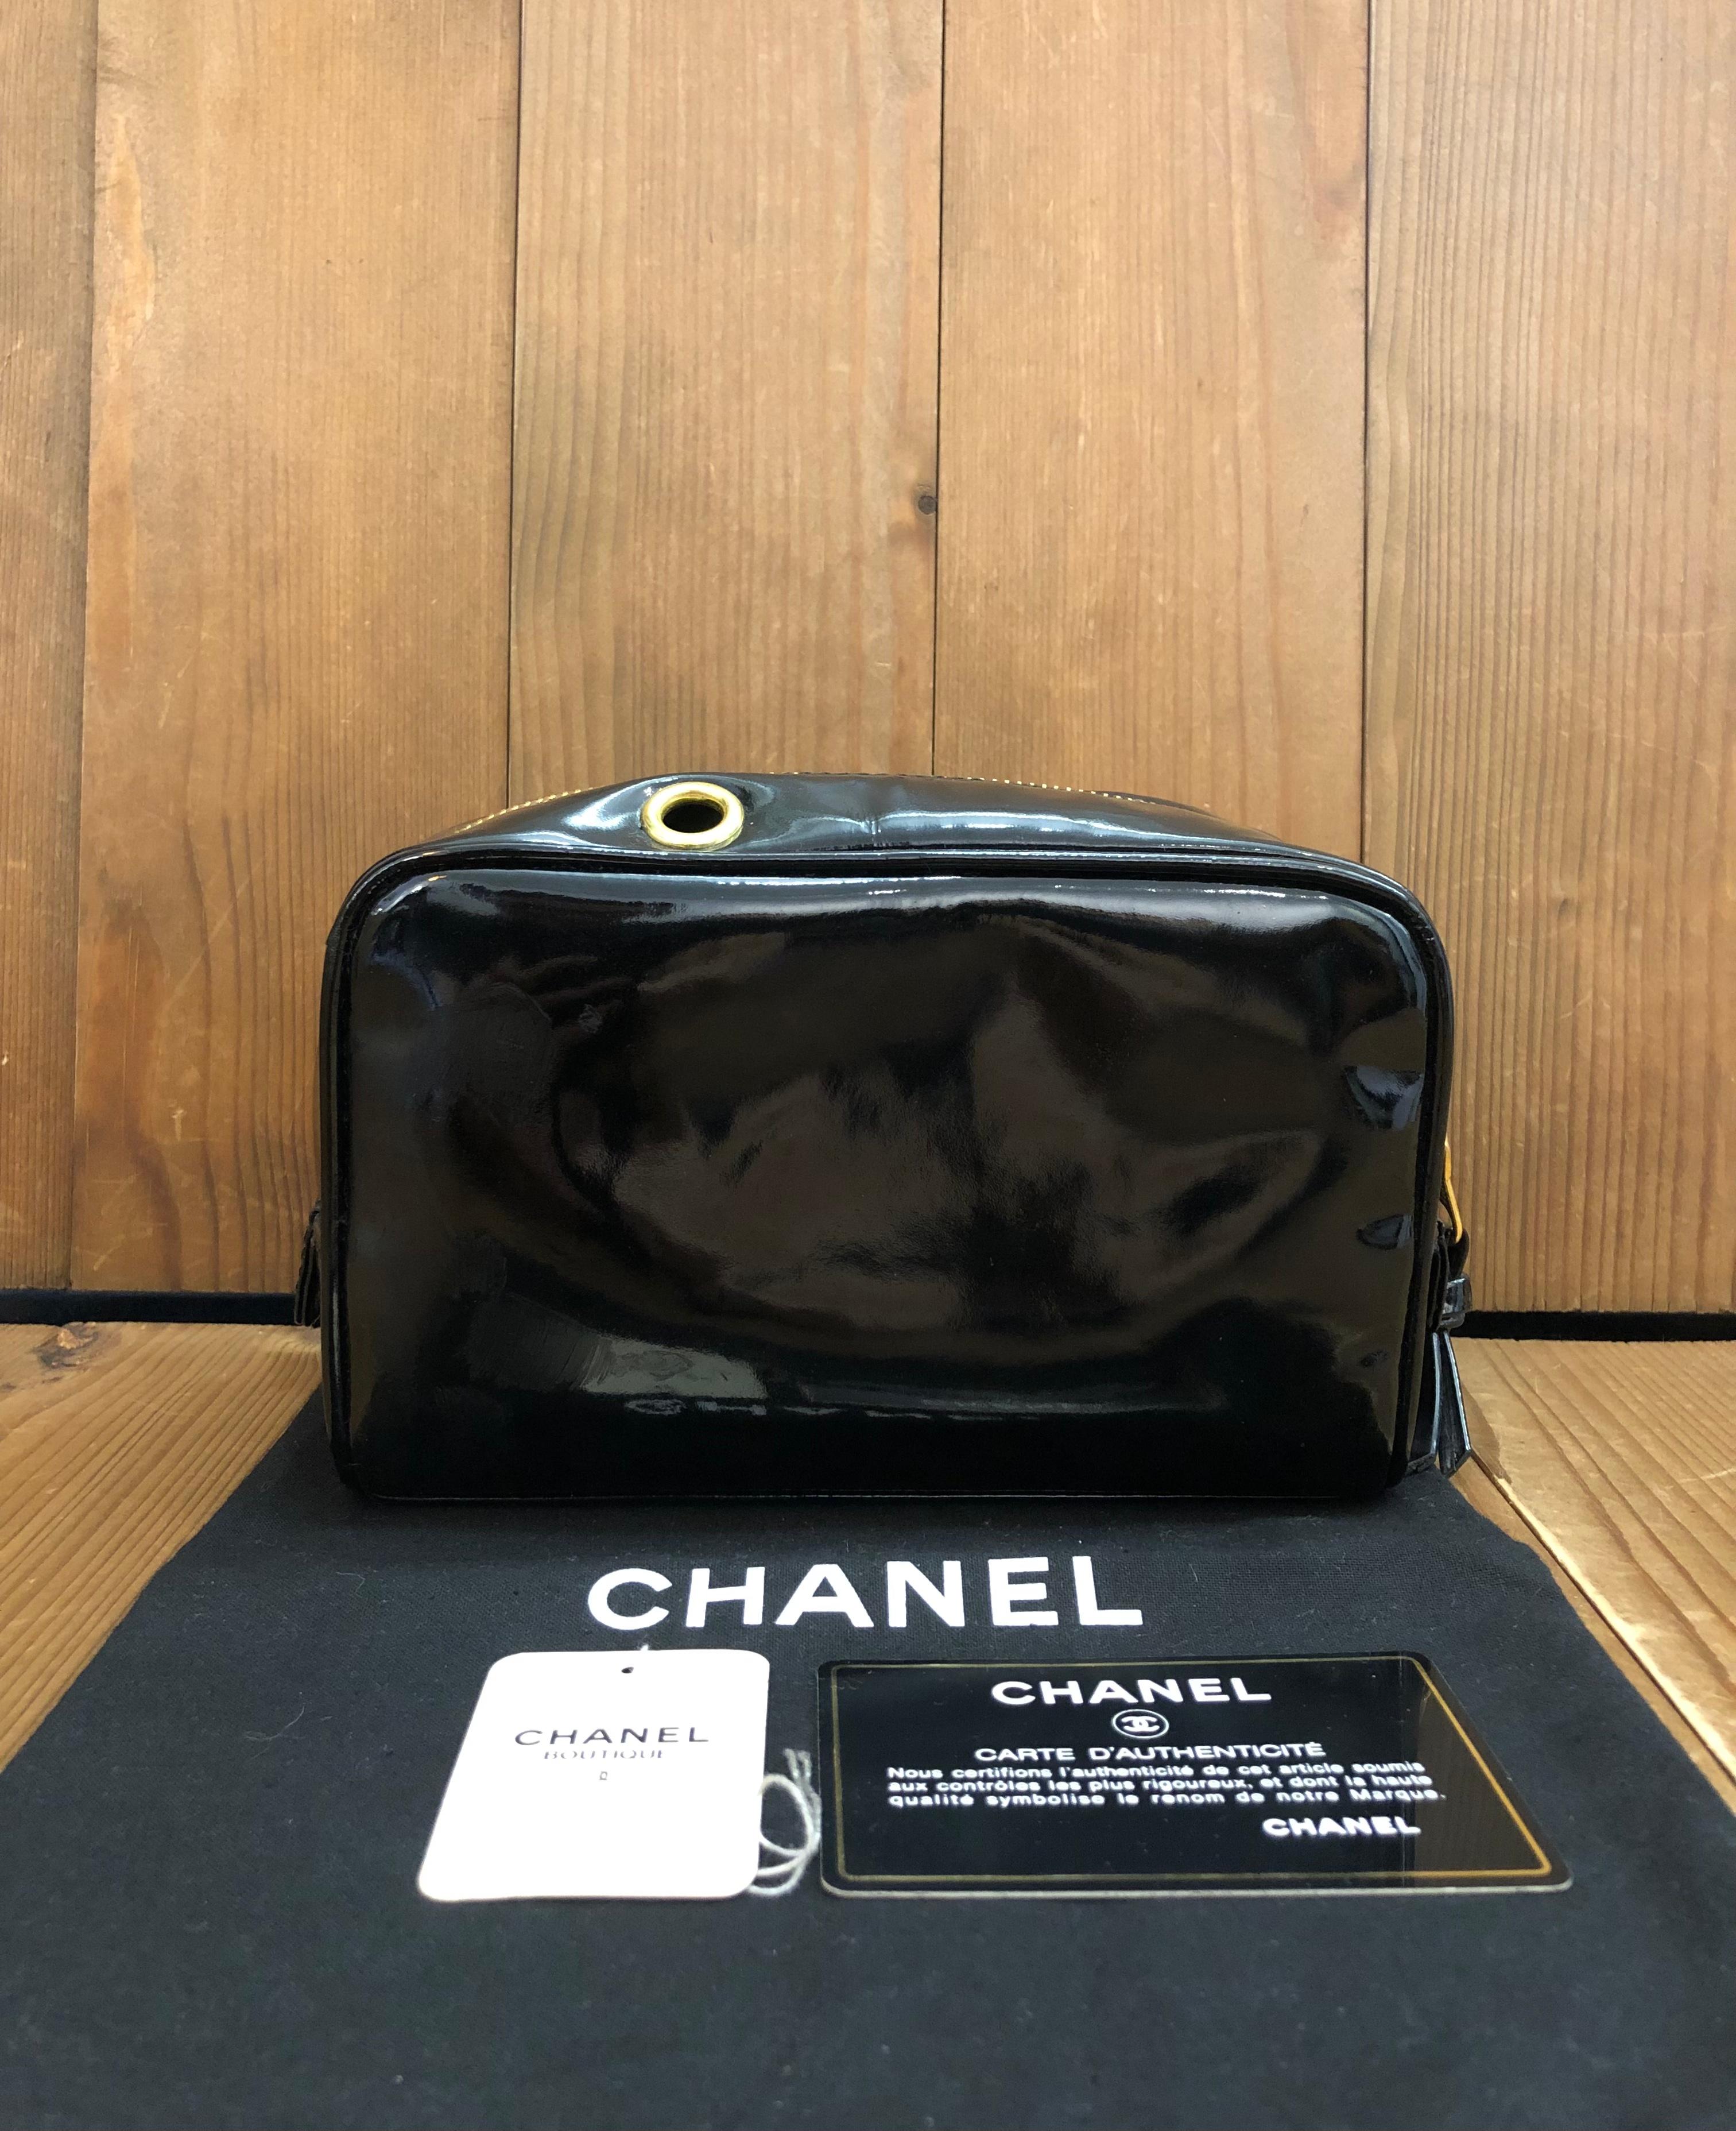 This vintage CHANEL Cosmetic Pouch Clutch Bag is crafted of black patent leather featuring gold toned hardware. Top zipper closure opens to a lambkin interior in black featuring two zippered pockets. Made in Italy. Measures approximately 7 x 3 x 4.5